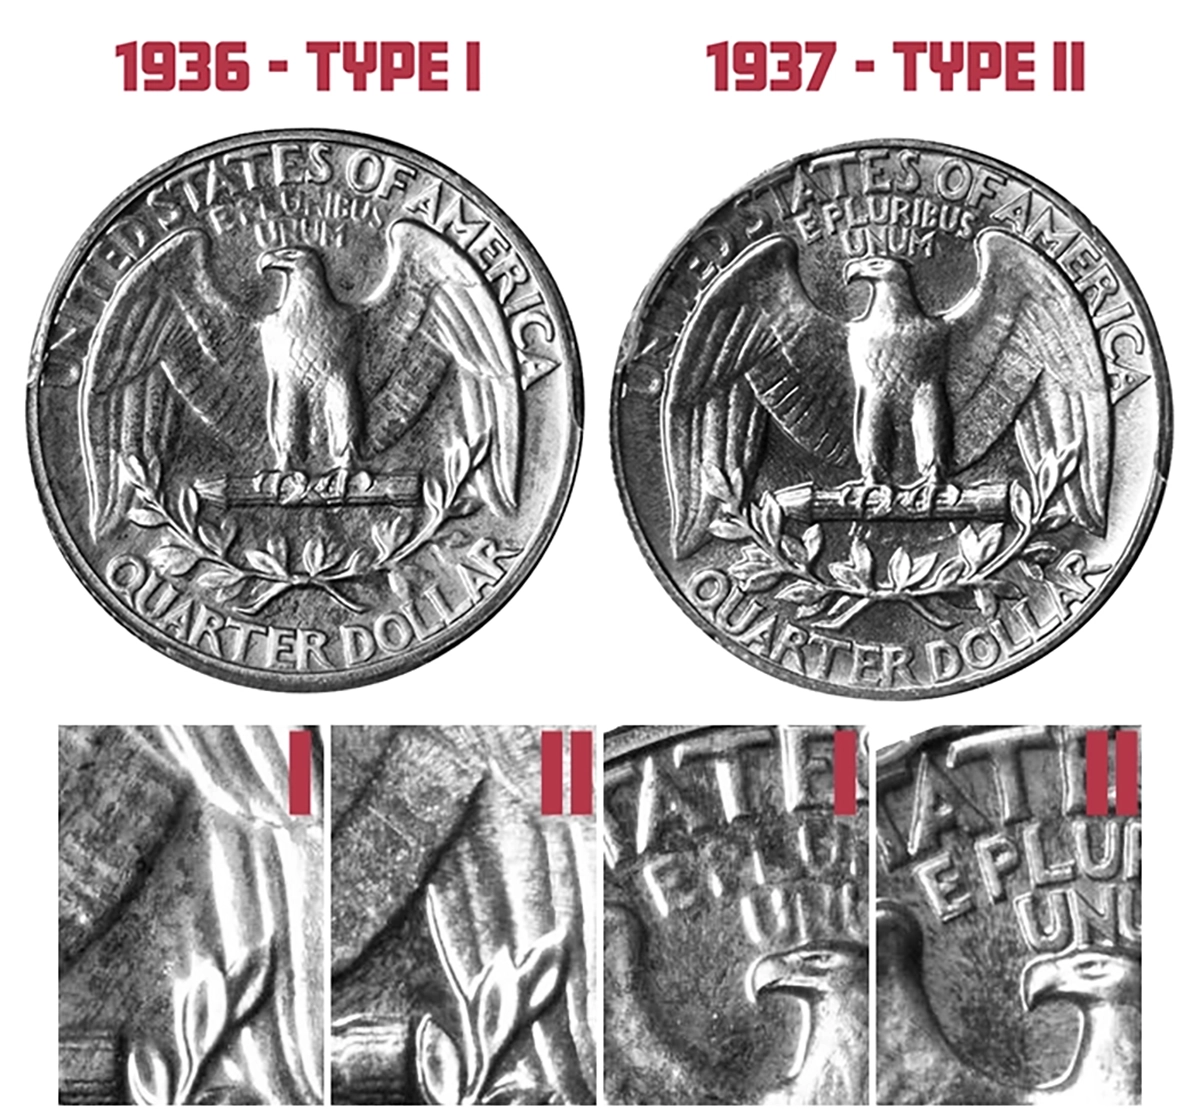 A side-by-side comparison of the 1936 and 1937 Proof Washington quarter reverses. Compare the strengthened eagle’s wing and thicker letters on the 1937 revision. Image: CoinWeek.